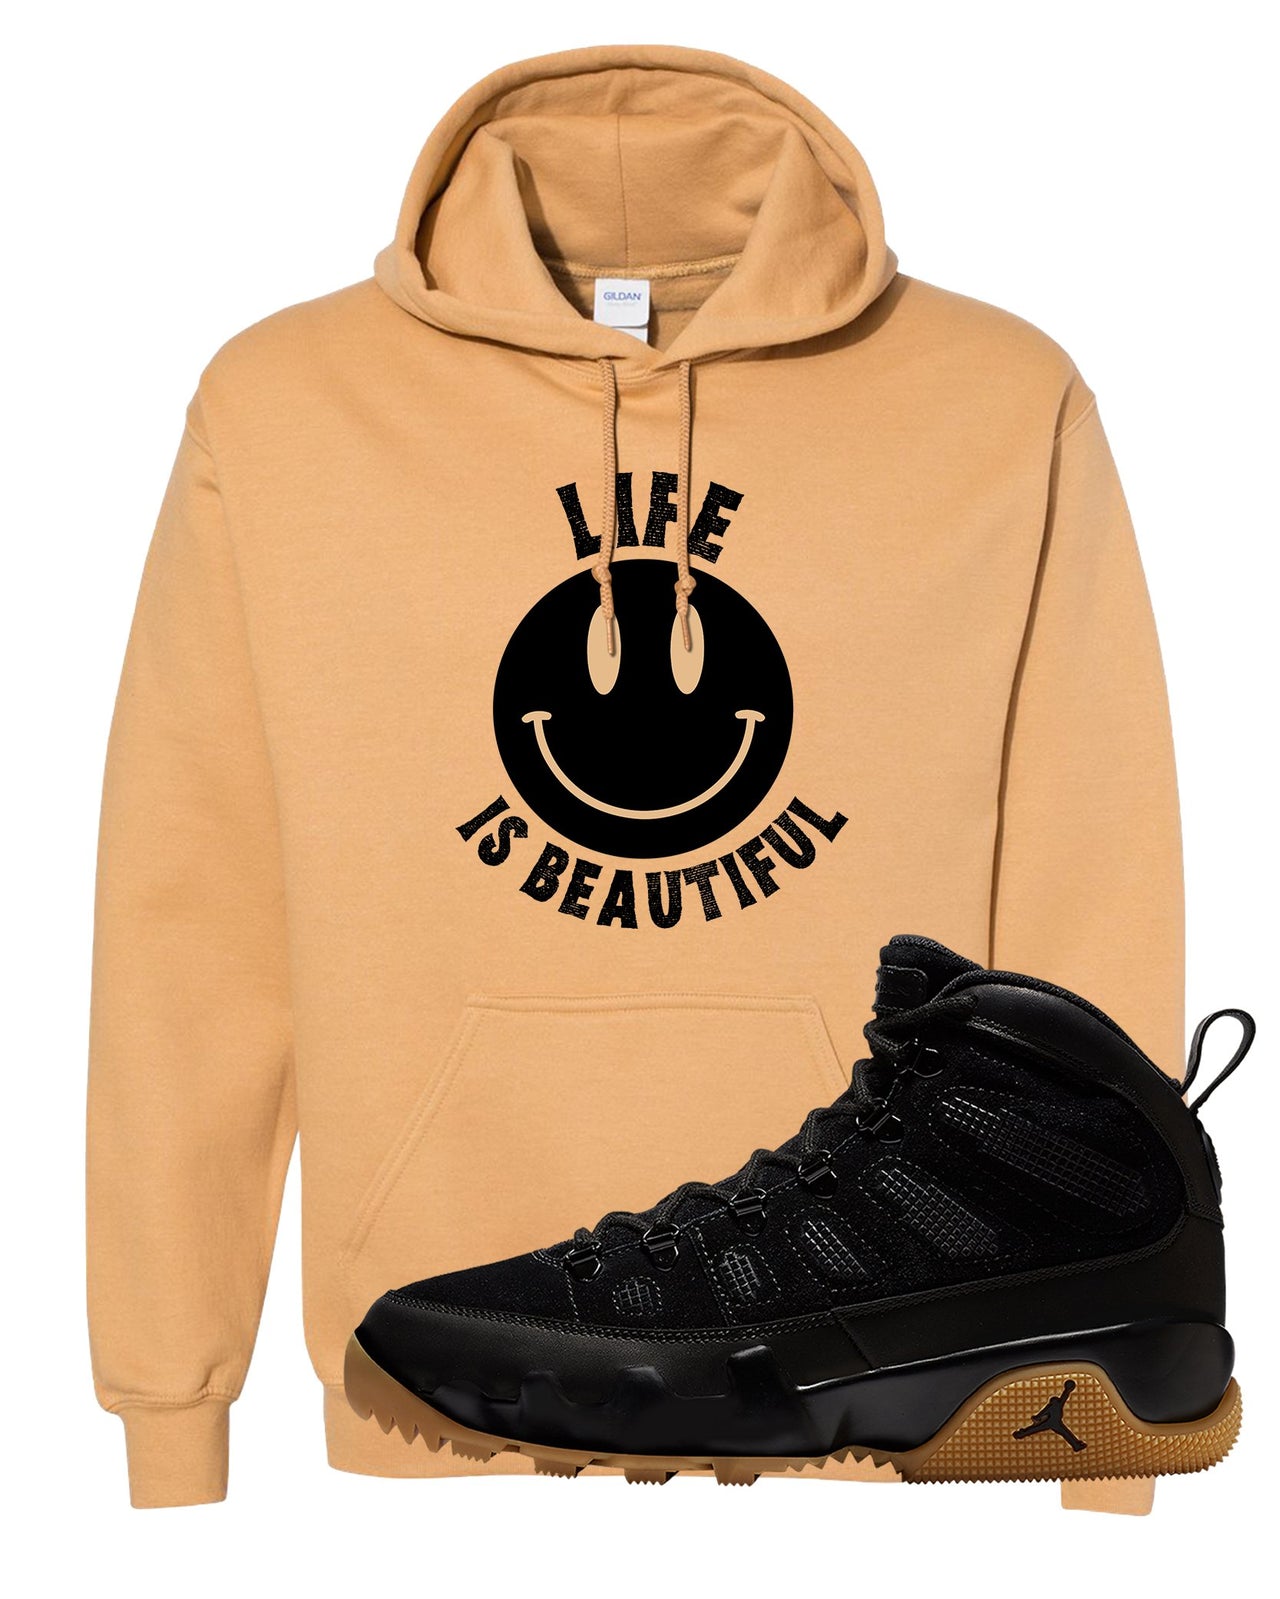 NRG Black Gum Boot 9s Hoodie | Smile Life Is Beautiful, Old Gold